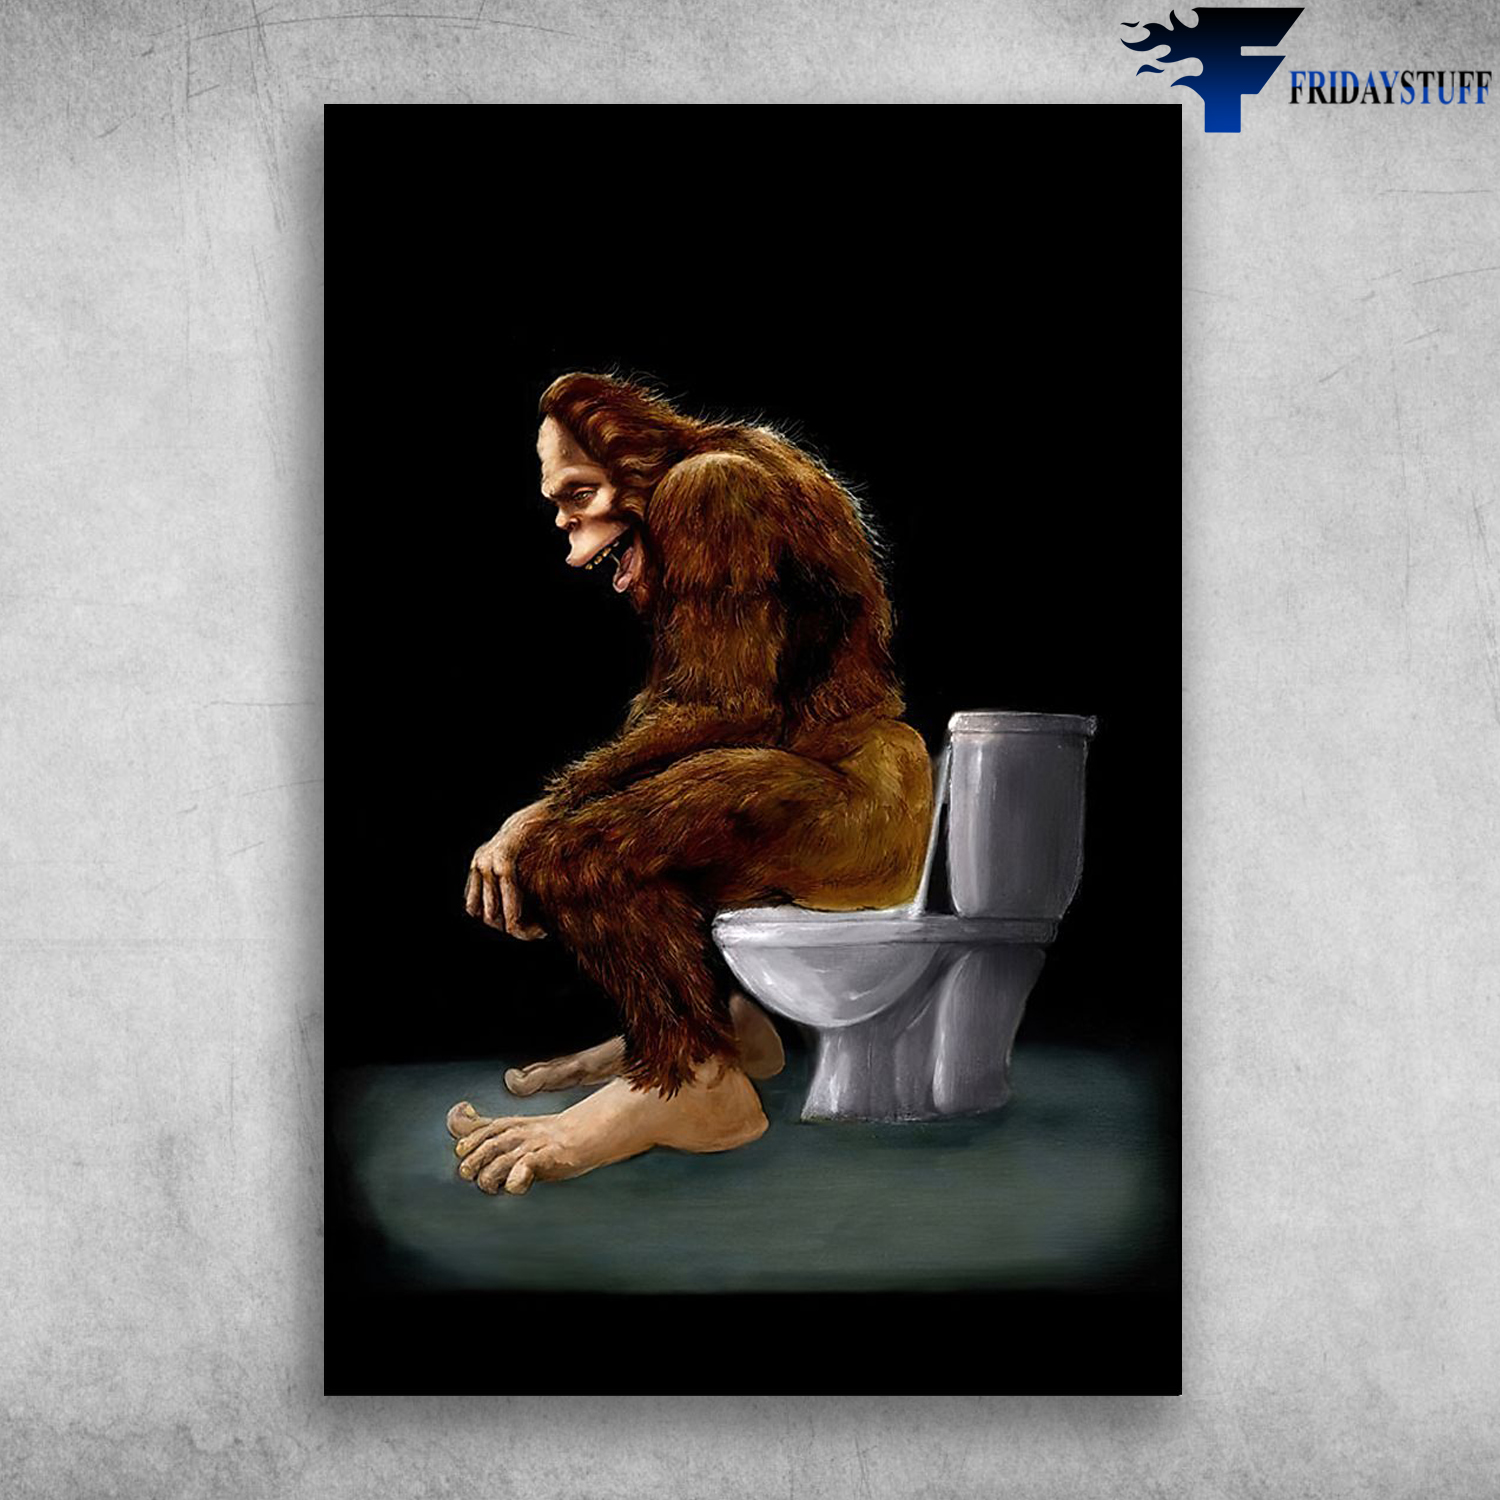 Bigfoot In Toilet With The Dark Background